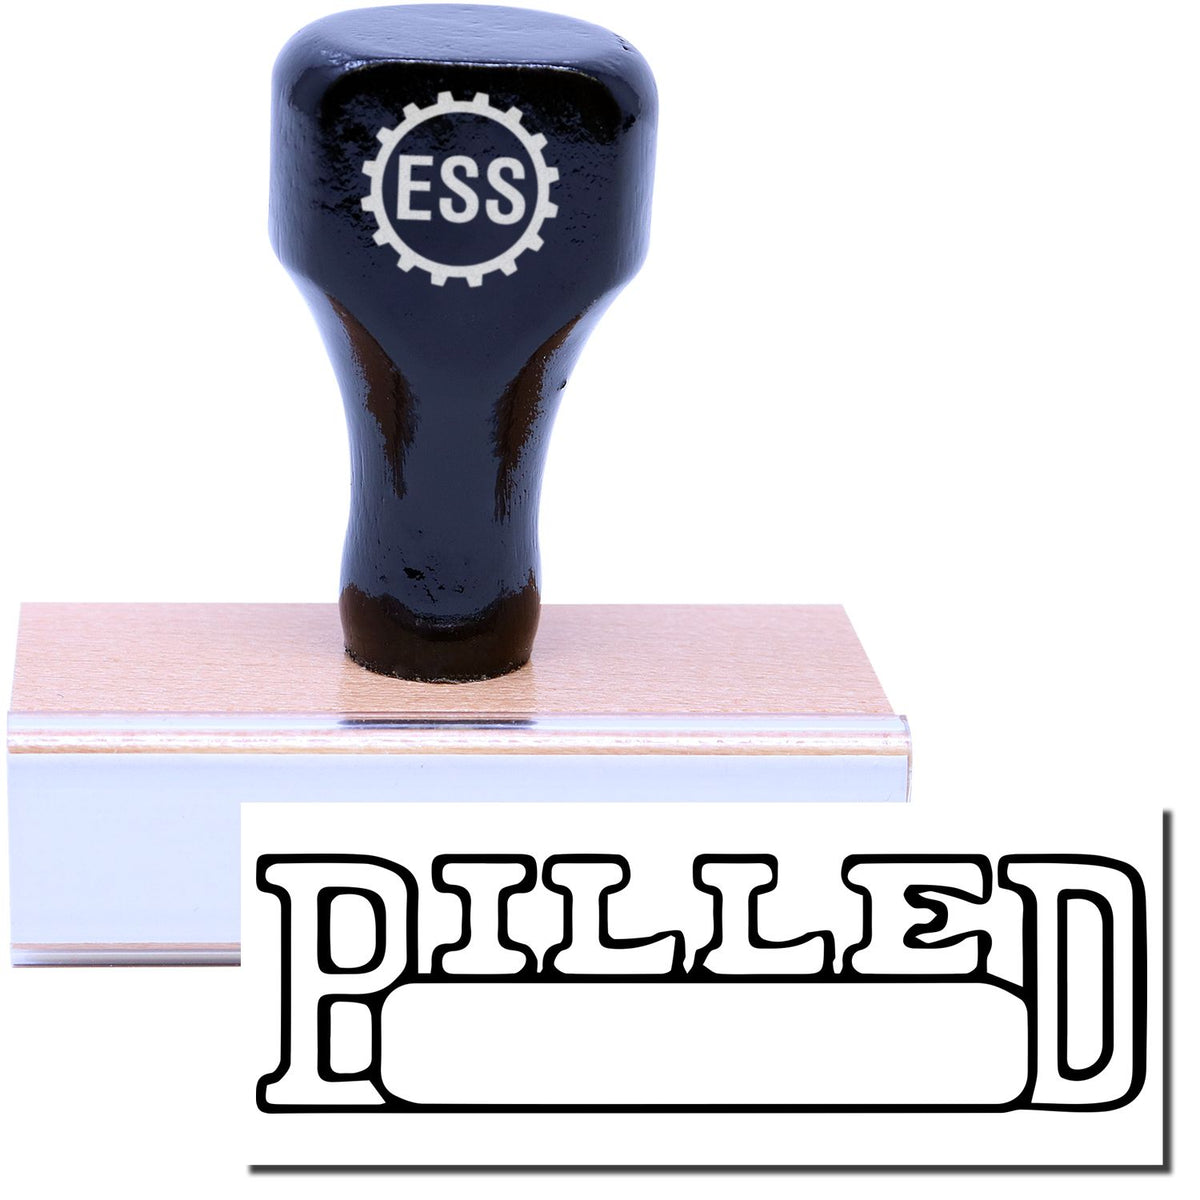 A stock office rubber stamp with a stamped image showing how the text &quot;BILLED&quot; in an outline font with a date box is displayed after stamping.